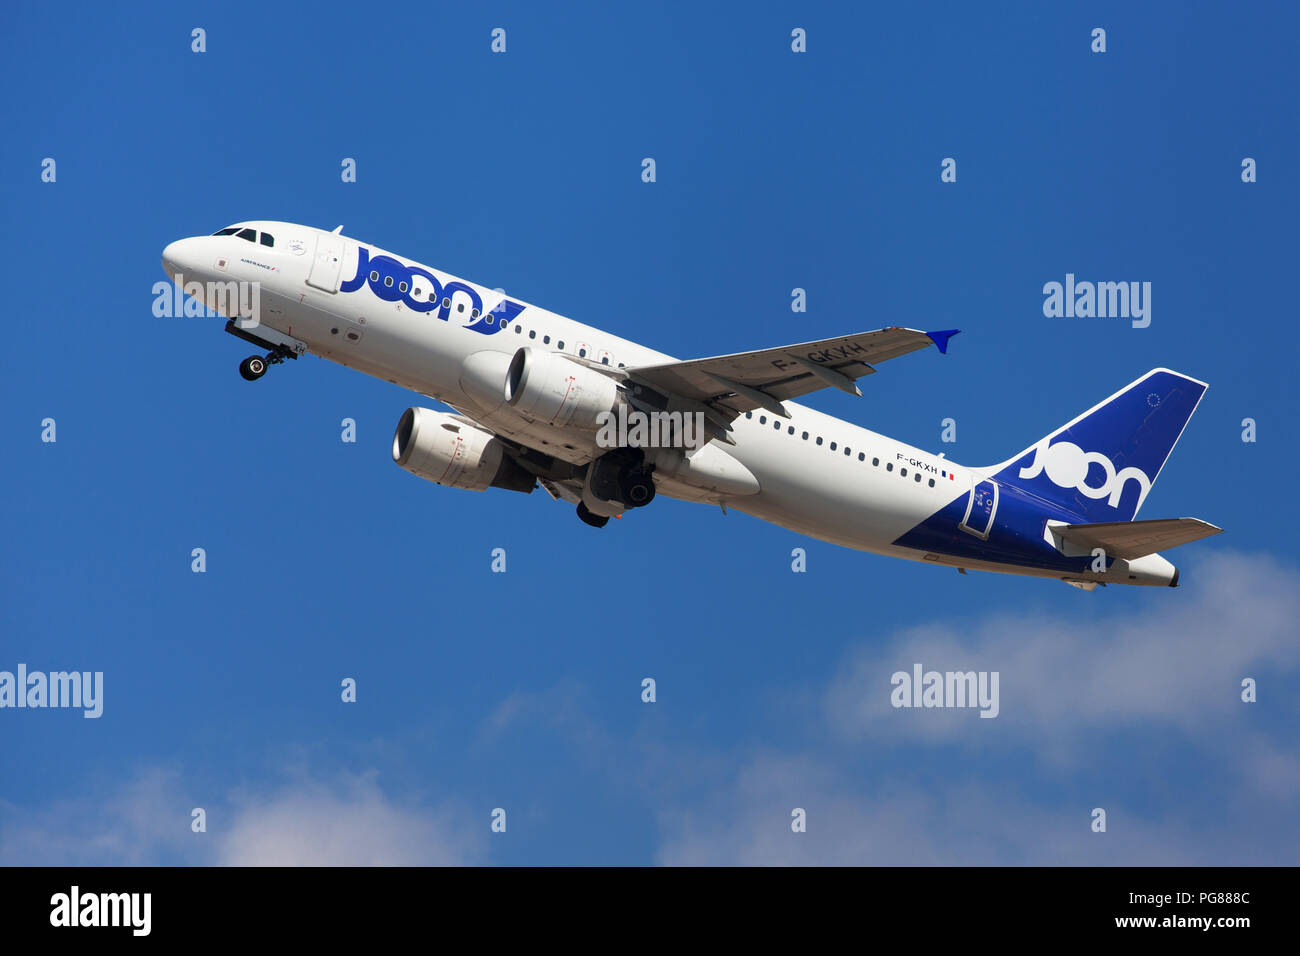 Barcelona, Spain - August 15, 2018: Joon Airbus A320 taking off from El Prat Airport in Barcelona, Spain. Stock Photo